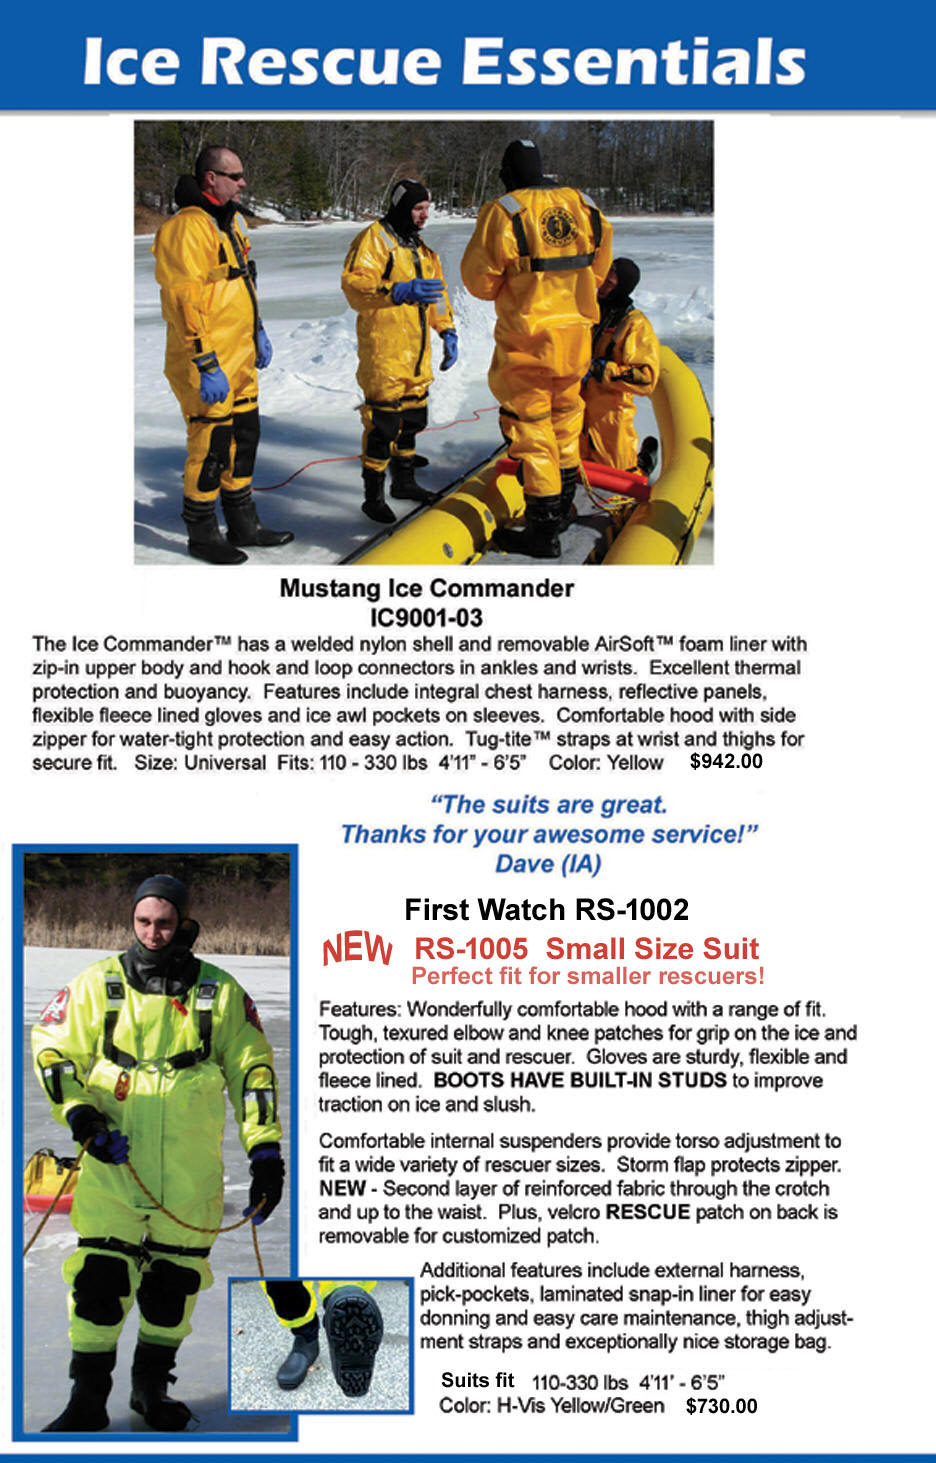 Mustang Survival and First Watch Ice rescue suits